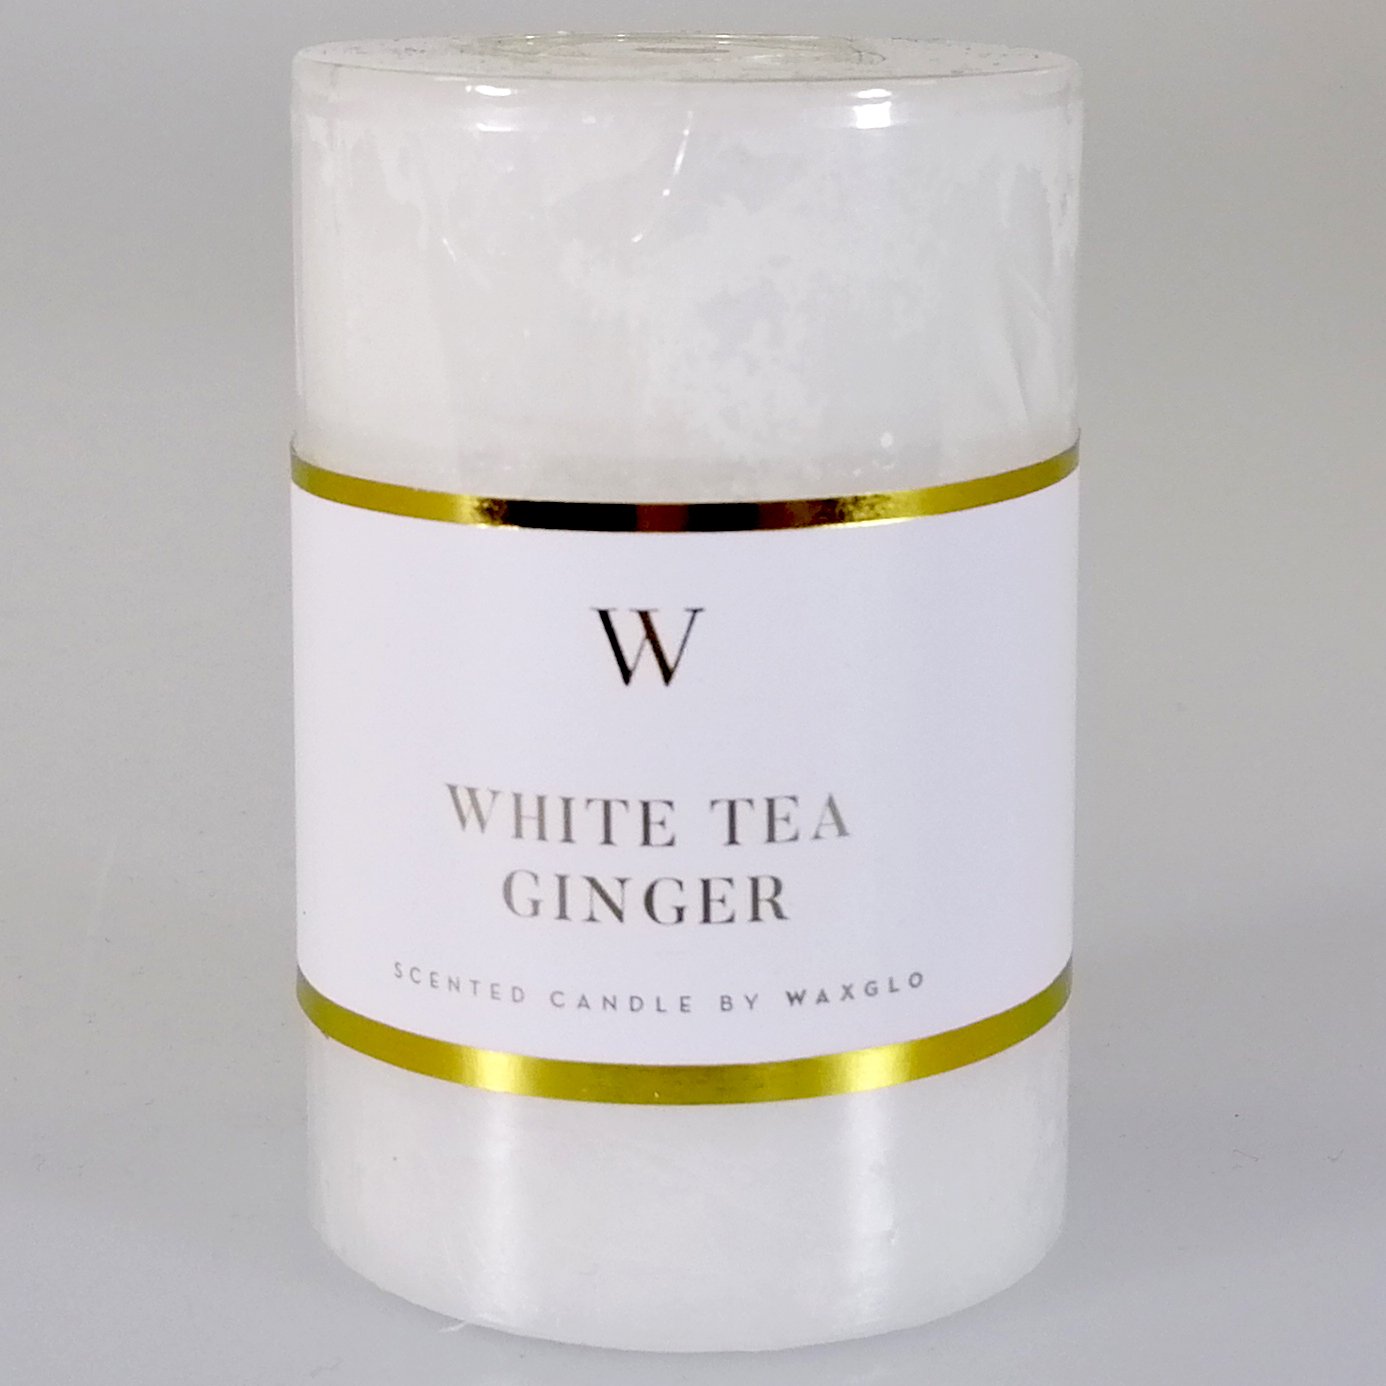 W' Scented Candle - 8 x 5cm - White Tea and Ginger